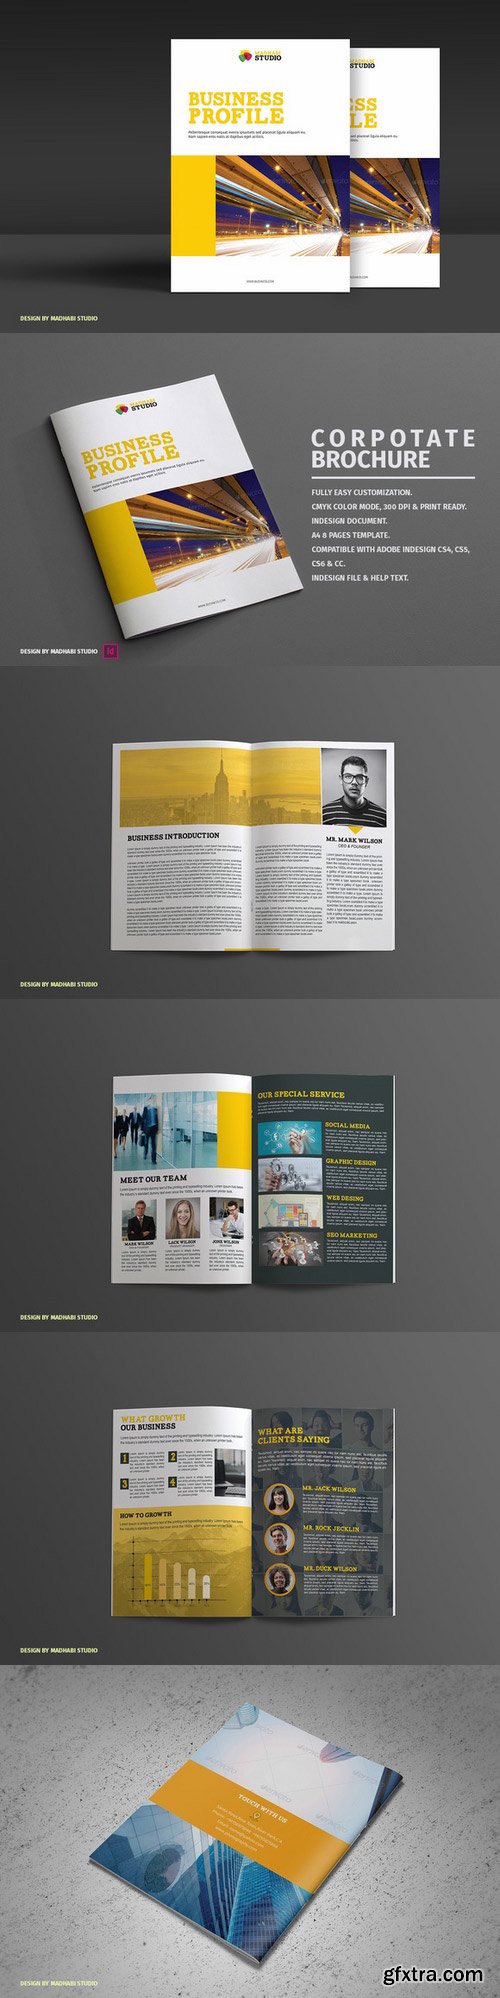 CM - Corporate Brochure 8Pages 423730